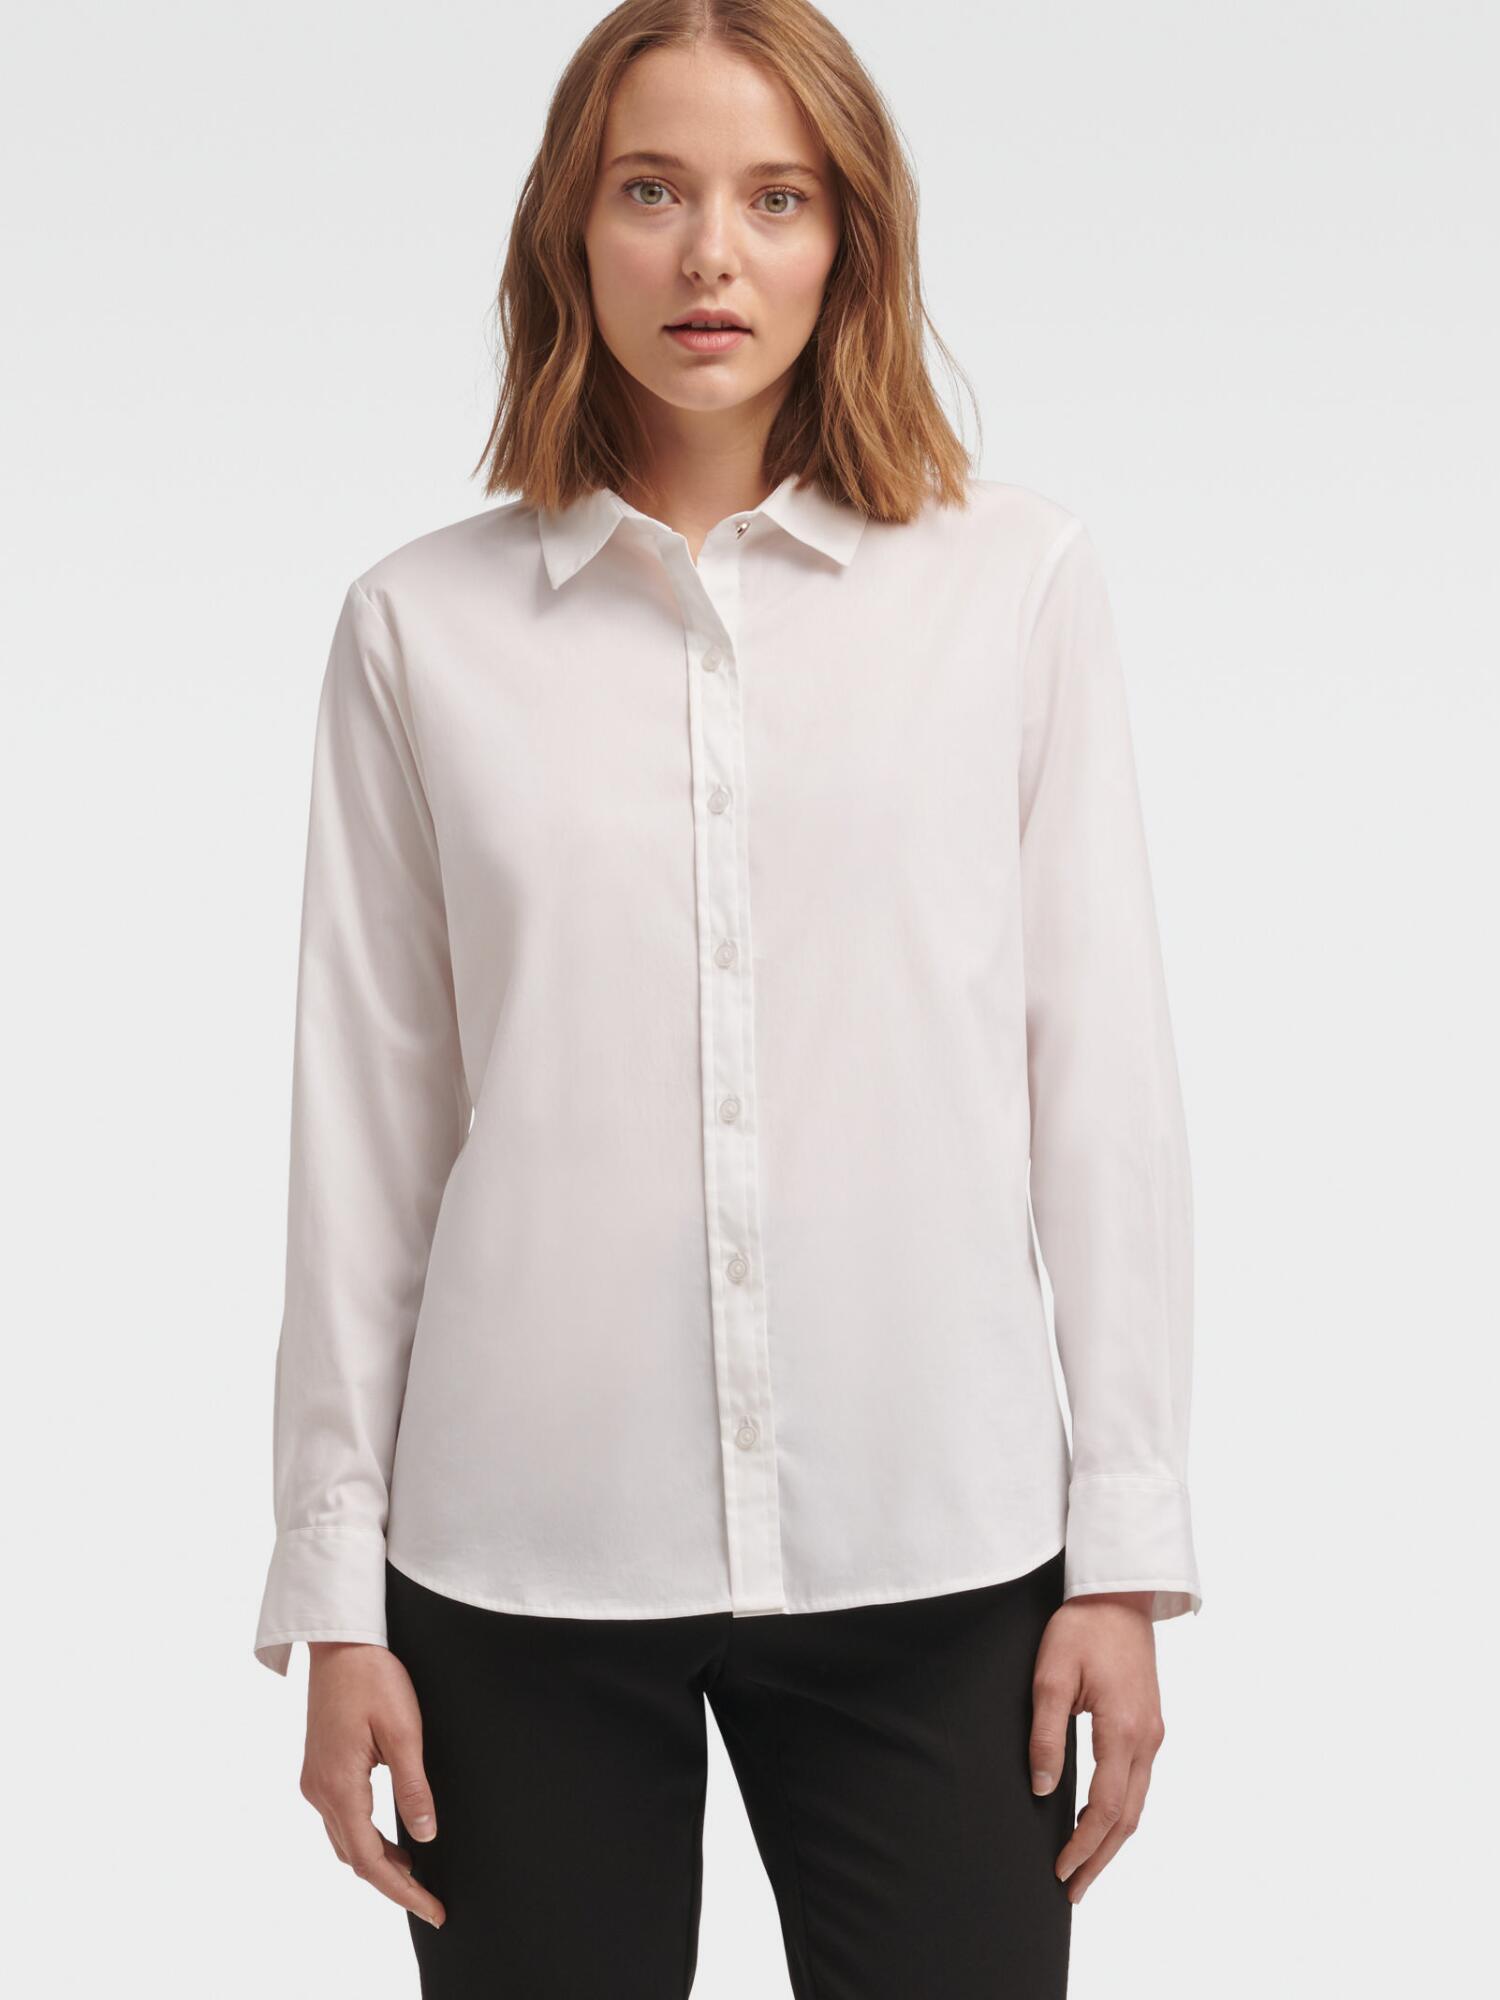 DKNY Oxford Button-up Shirt in White - Lyst